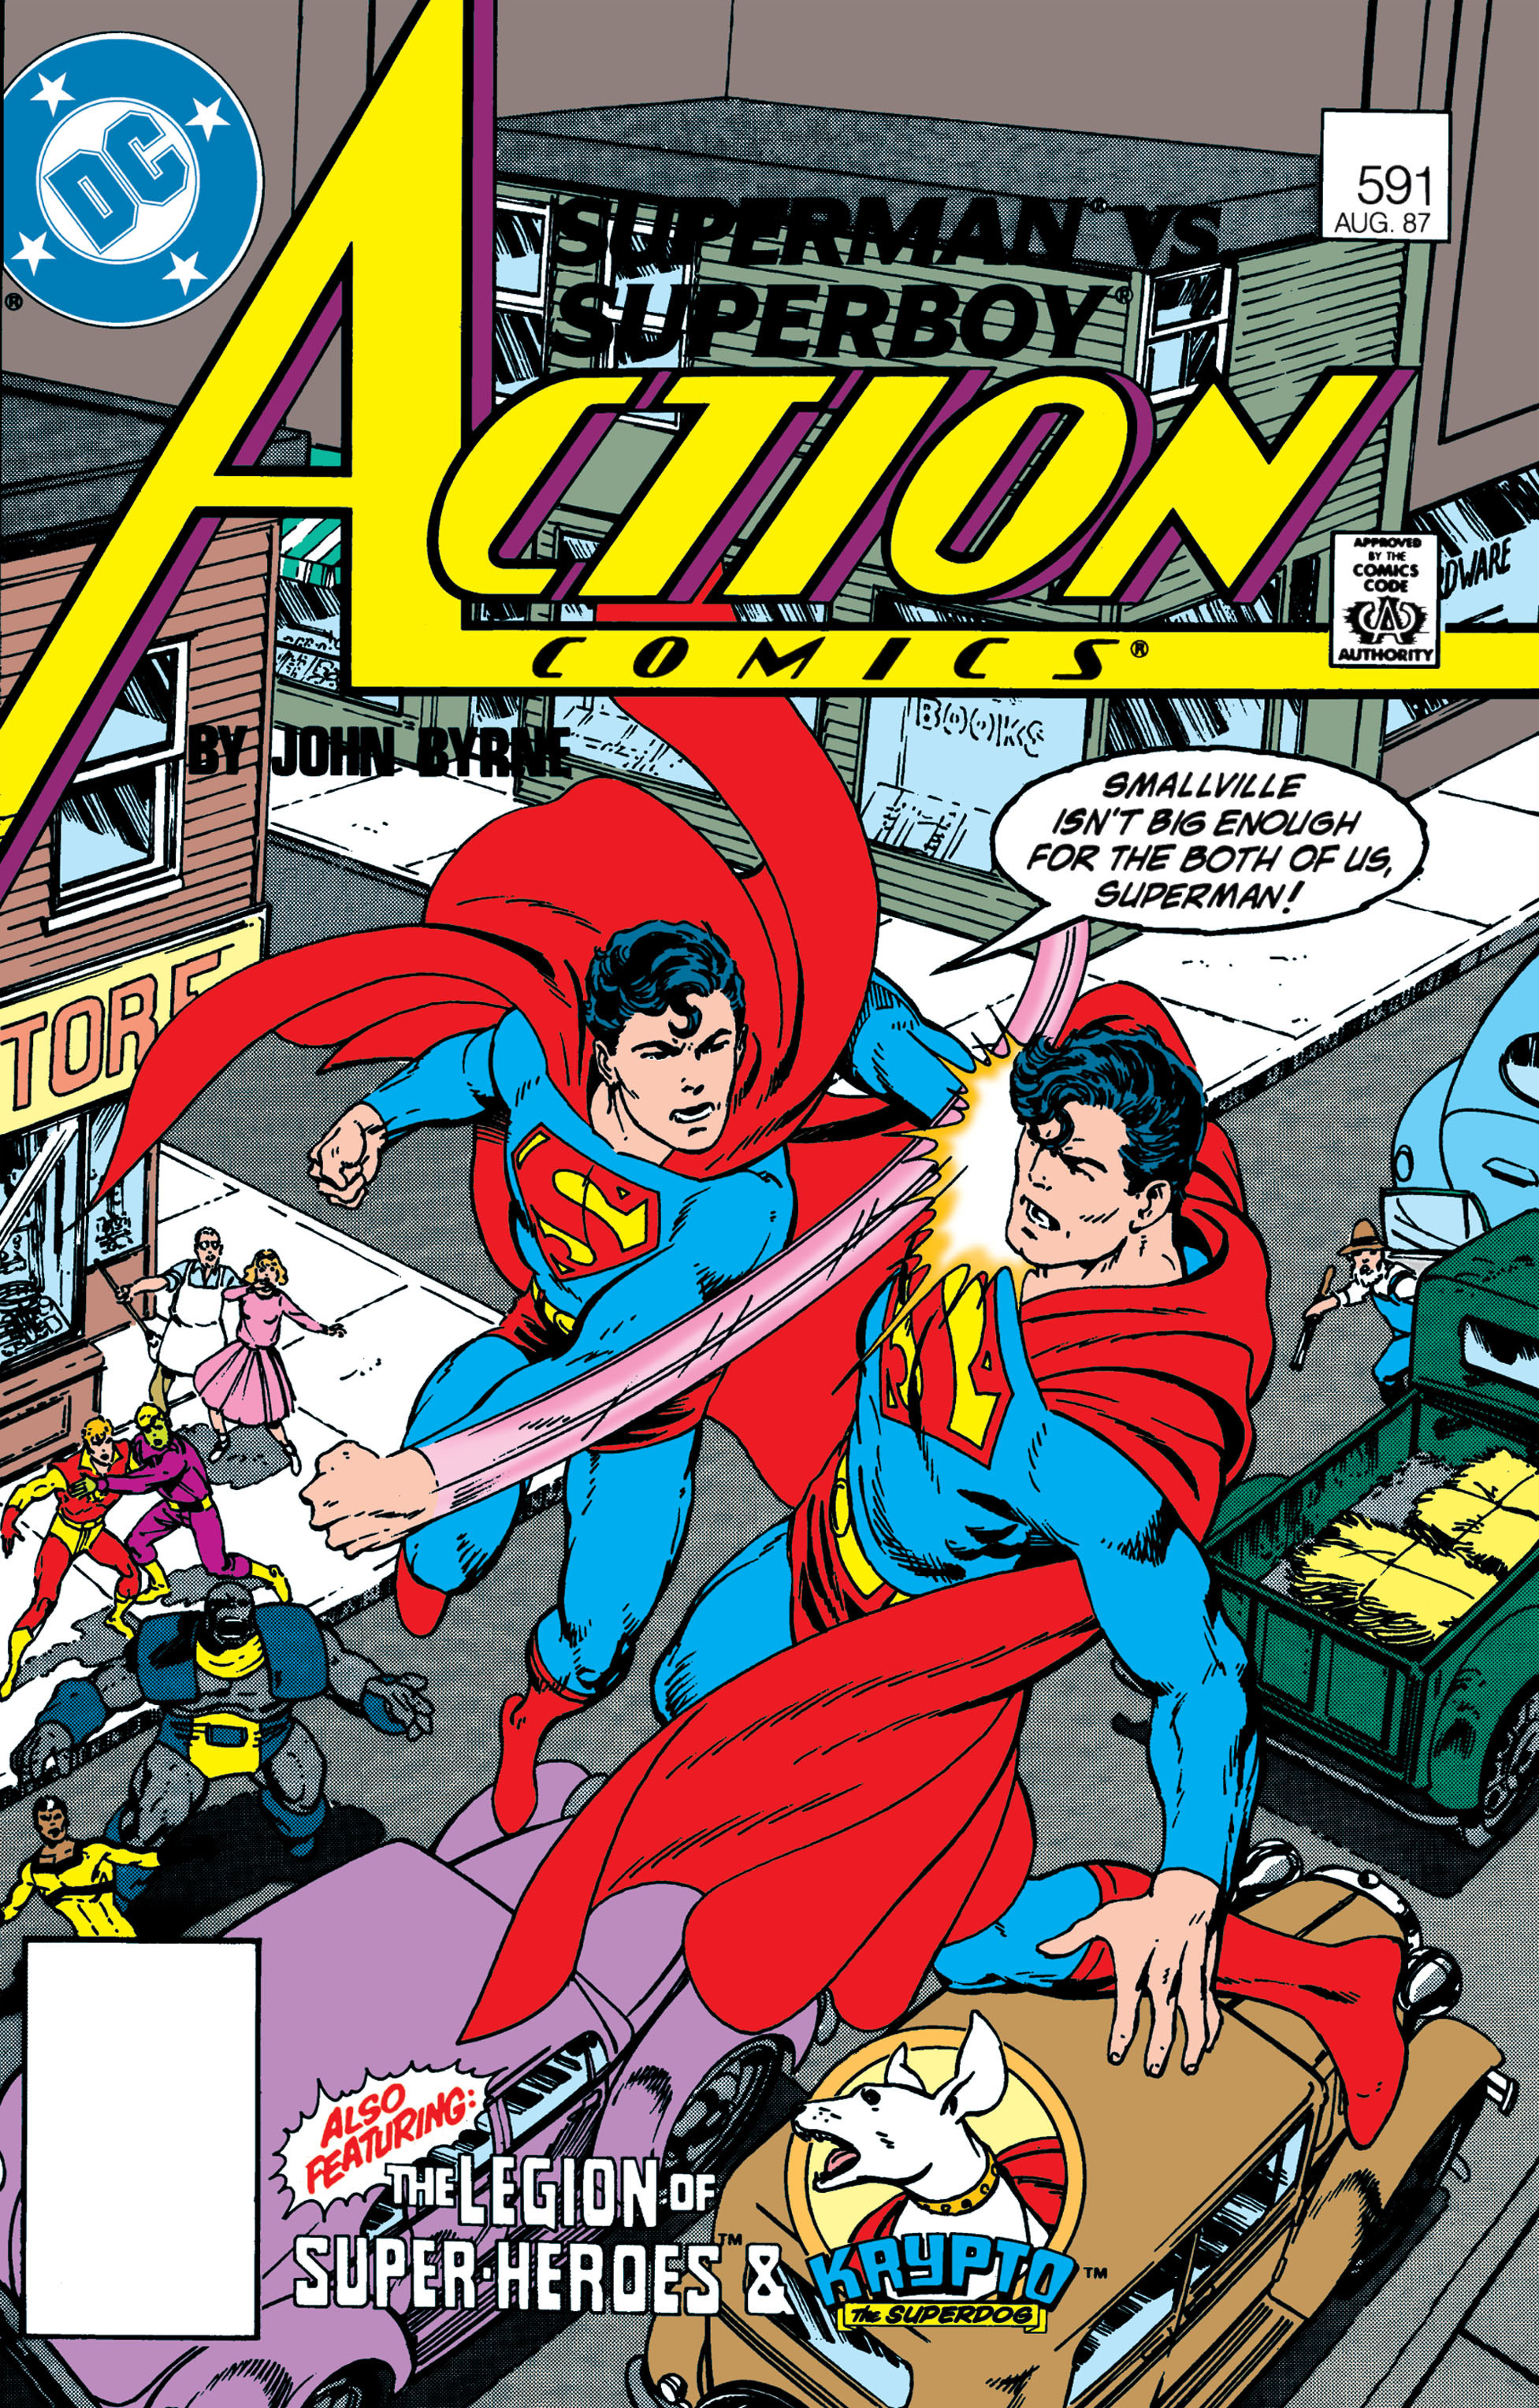 Read online Superman (2011) comic -  Issue # _Special - Superman 201 - 22